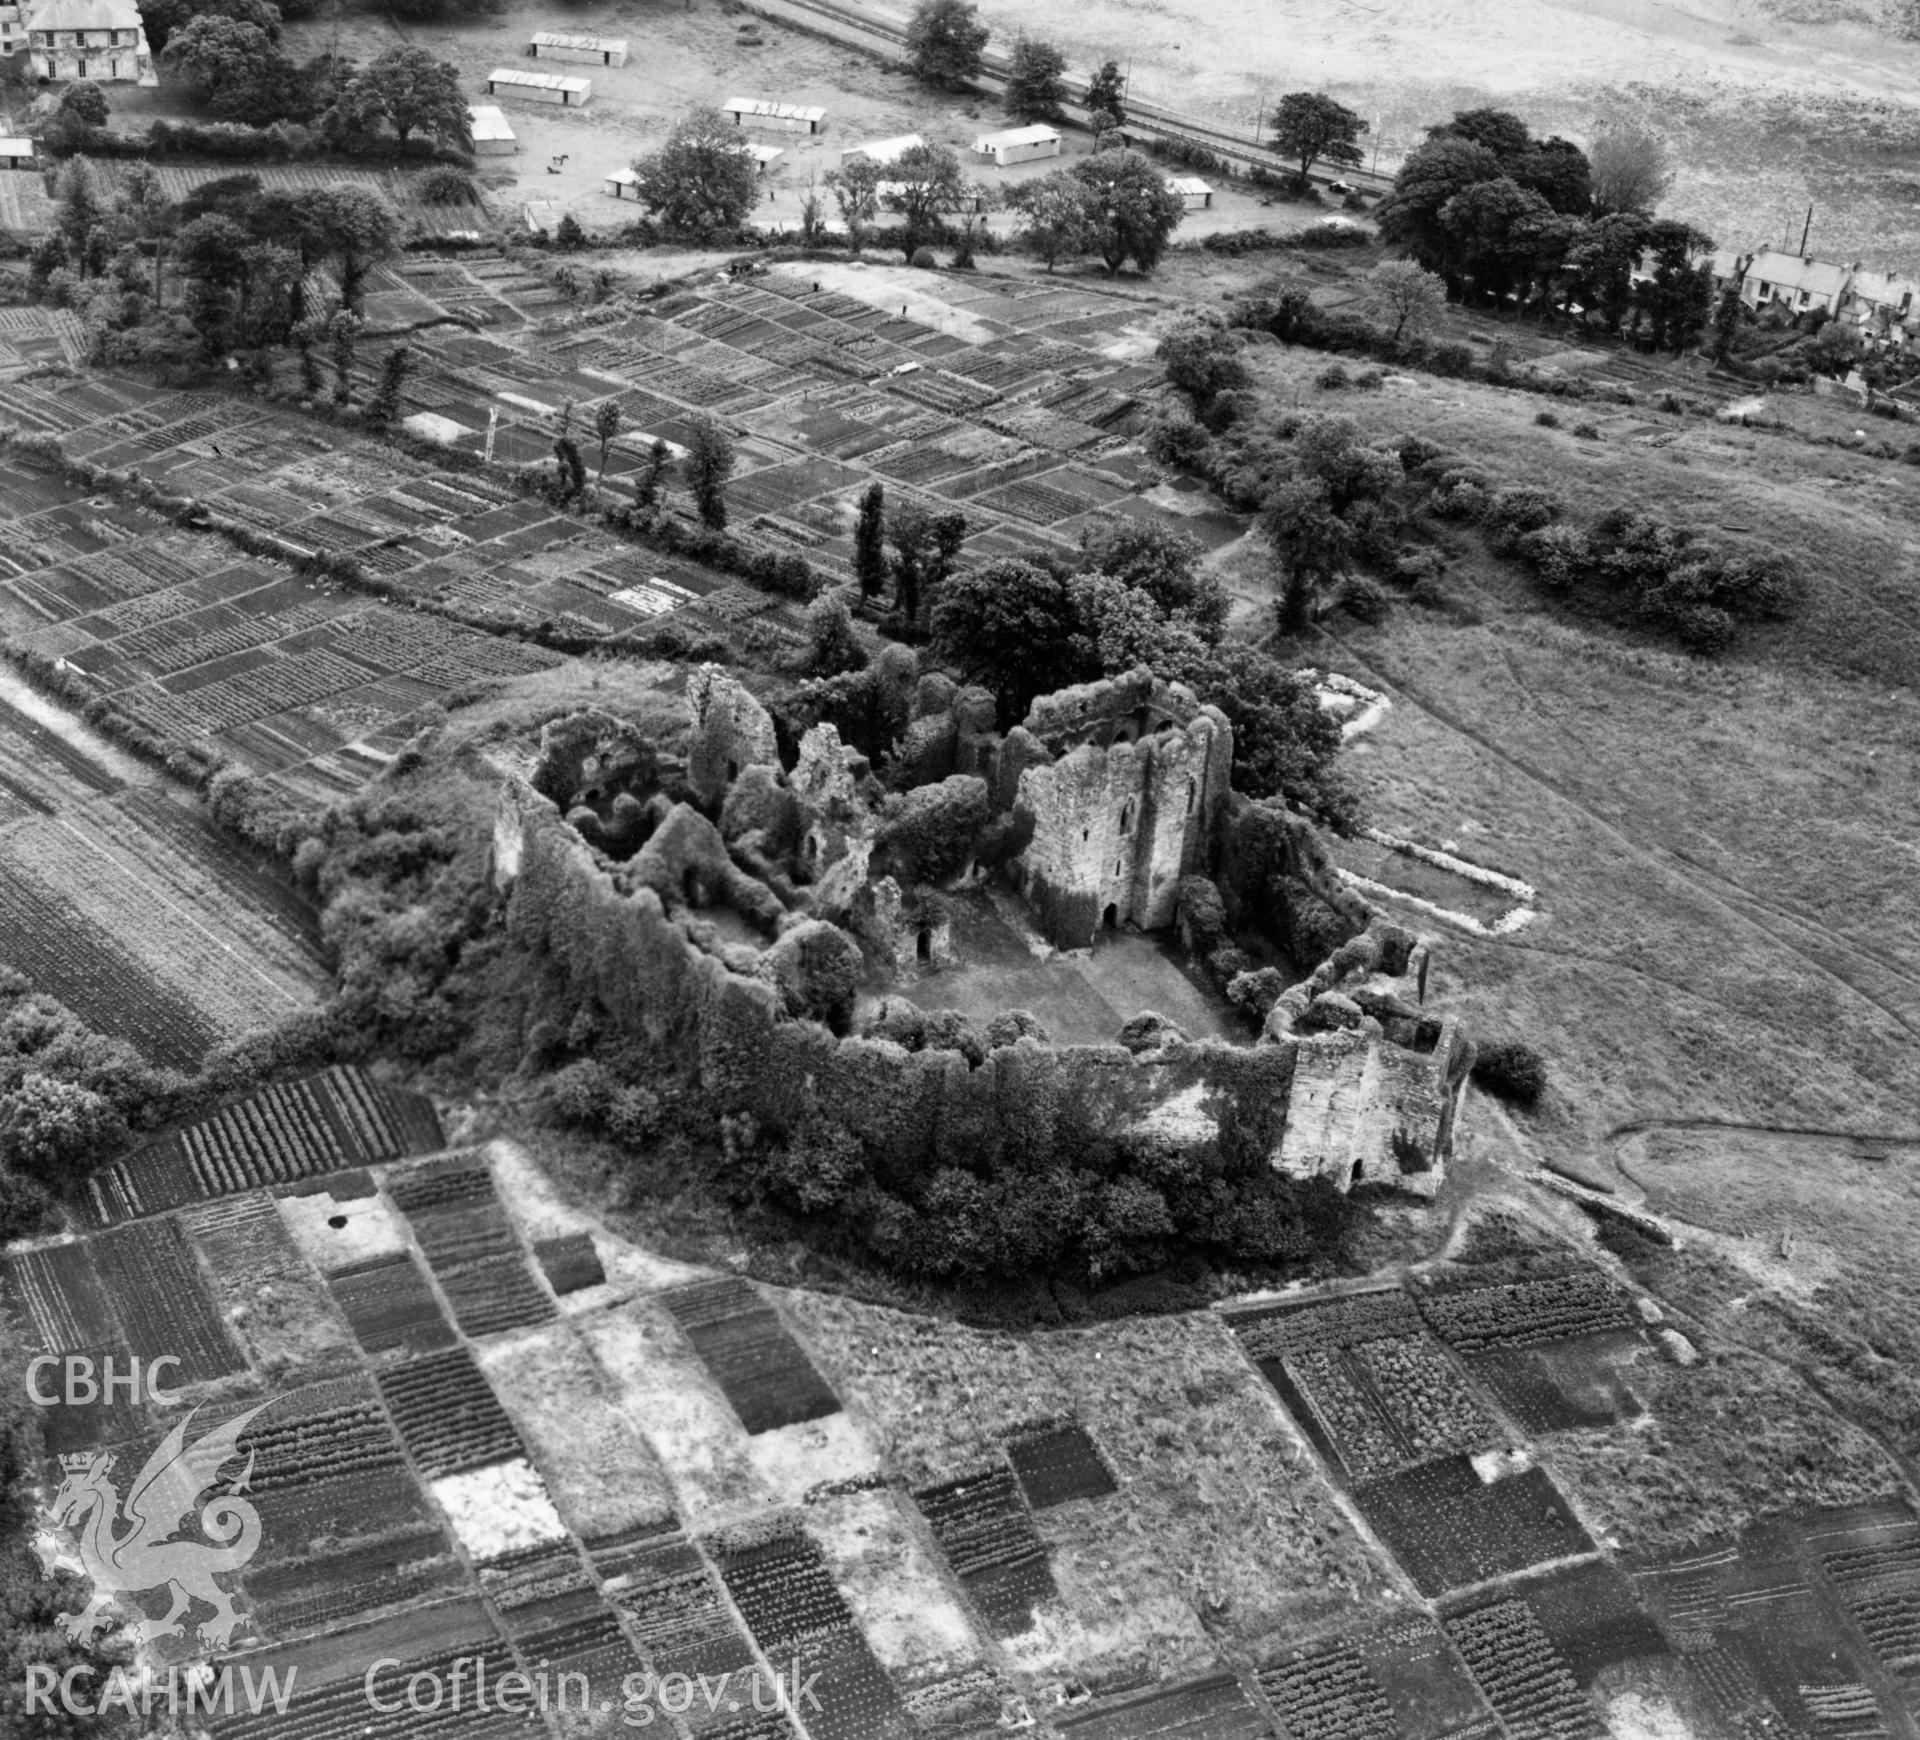 View of Oystermouth Castle showing allotments. Oblique aerial photograph, 5?" cut roll film.